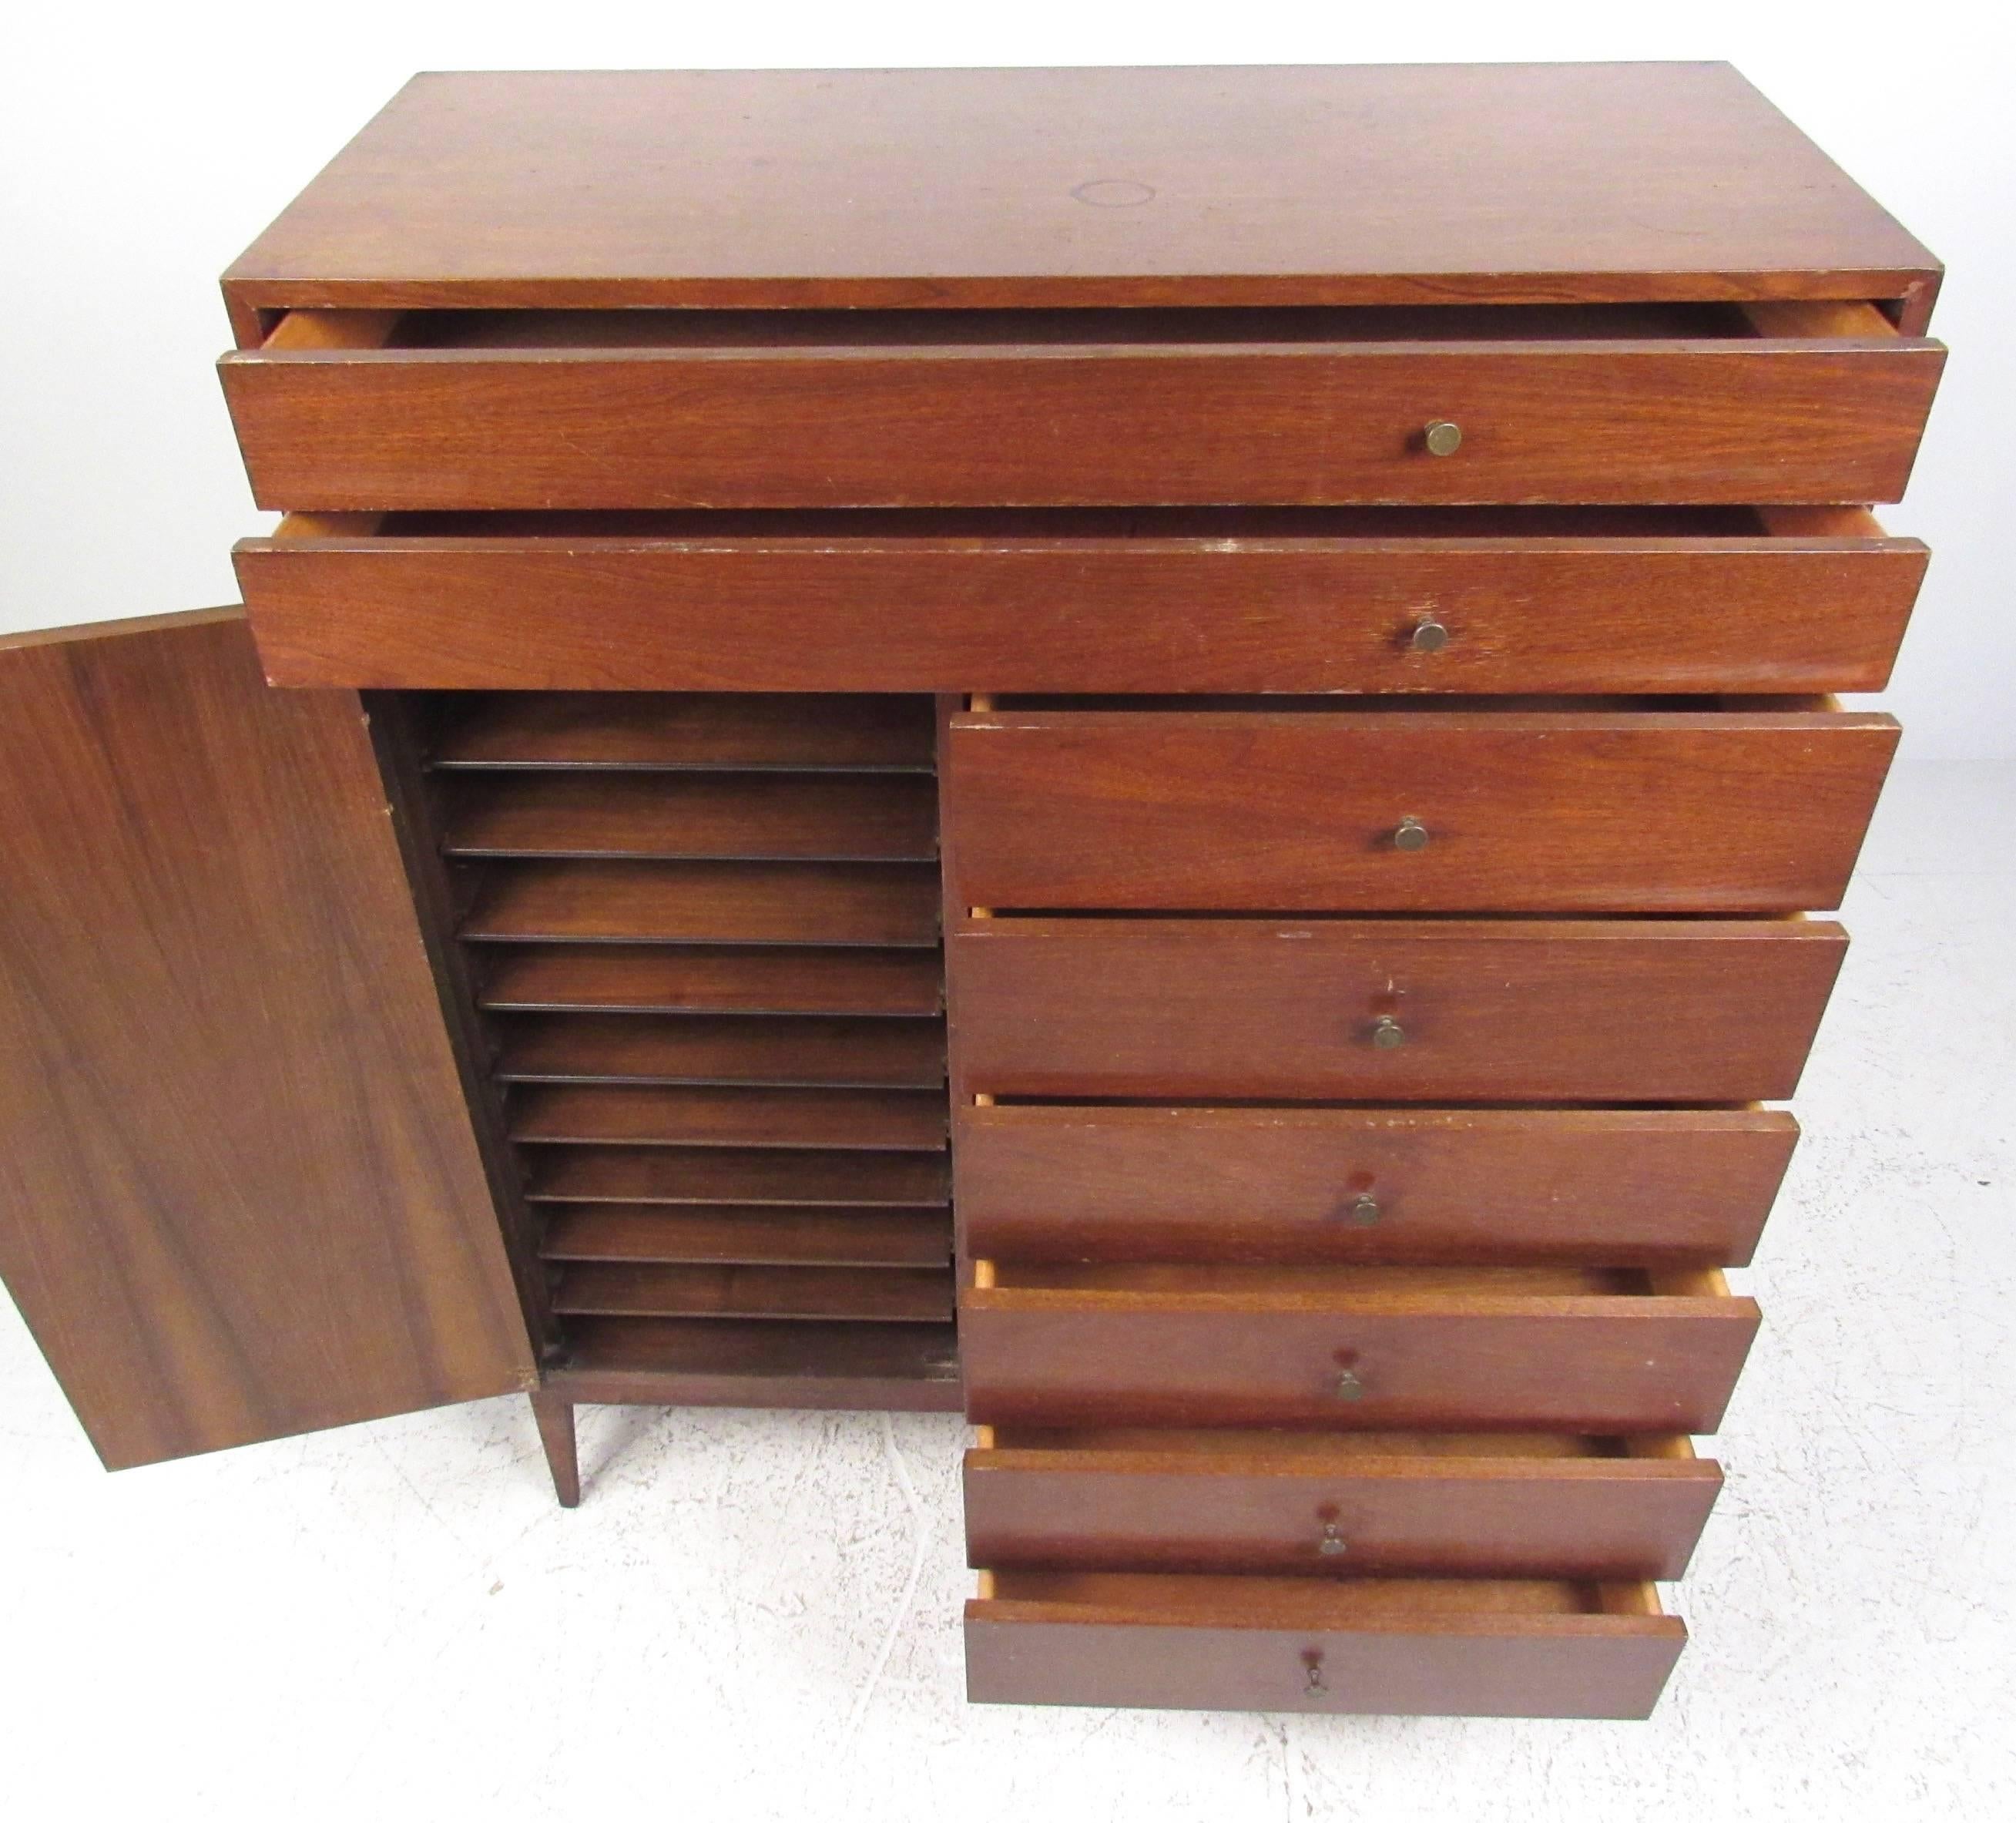 This stunning highboy dresser features unique graduated drawers with an addition cabinet containing easy slide shelves for ease of access. The unique design details on this mid-century dresser make this Paul McCobb style storage dresser a stylish